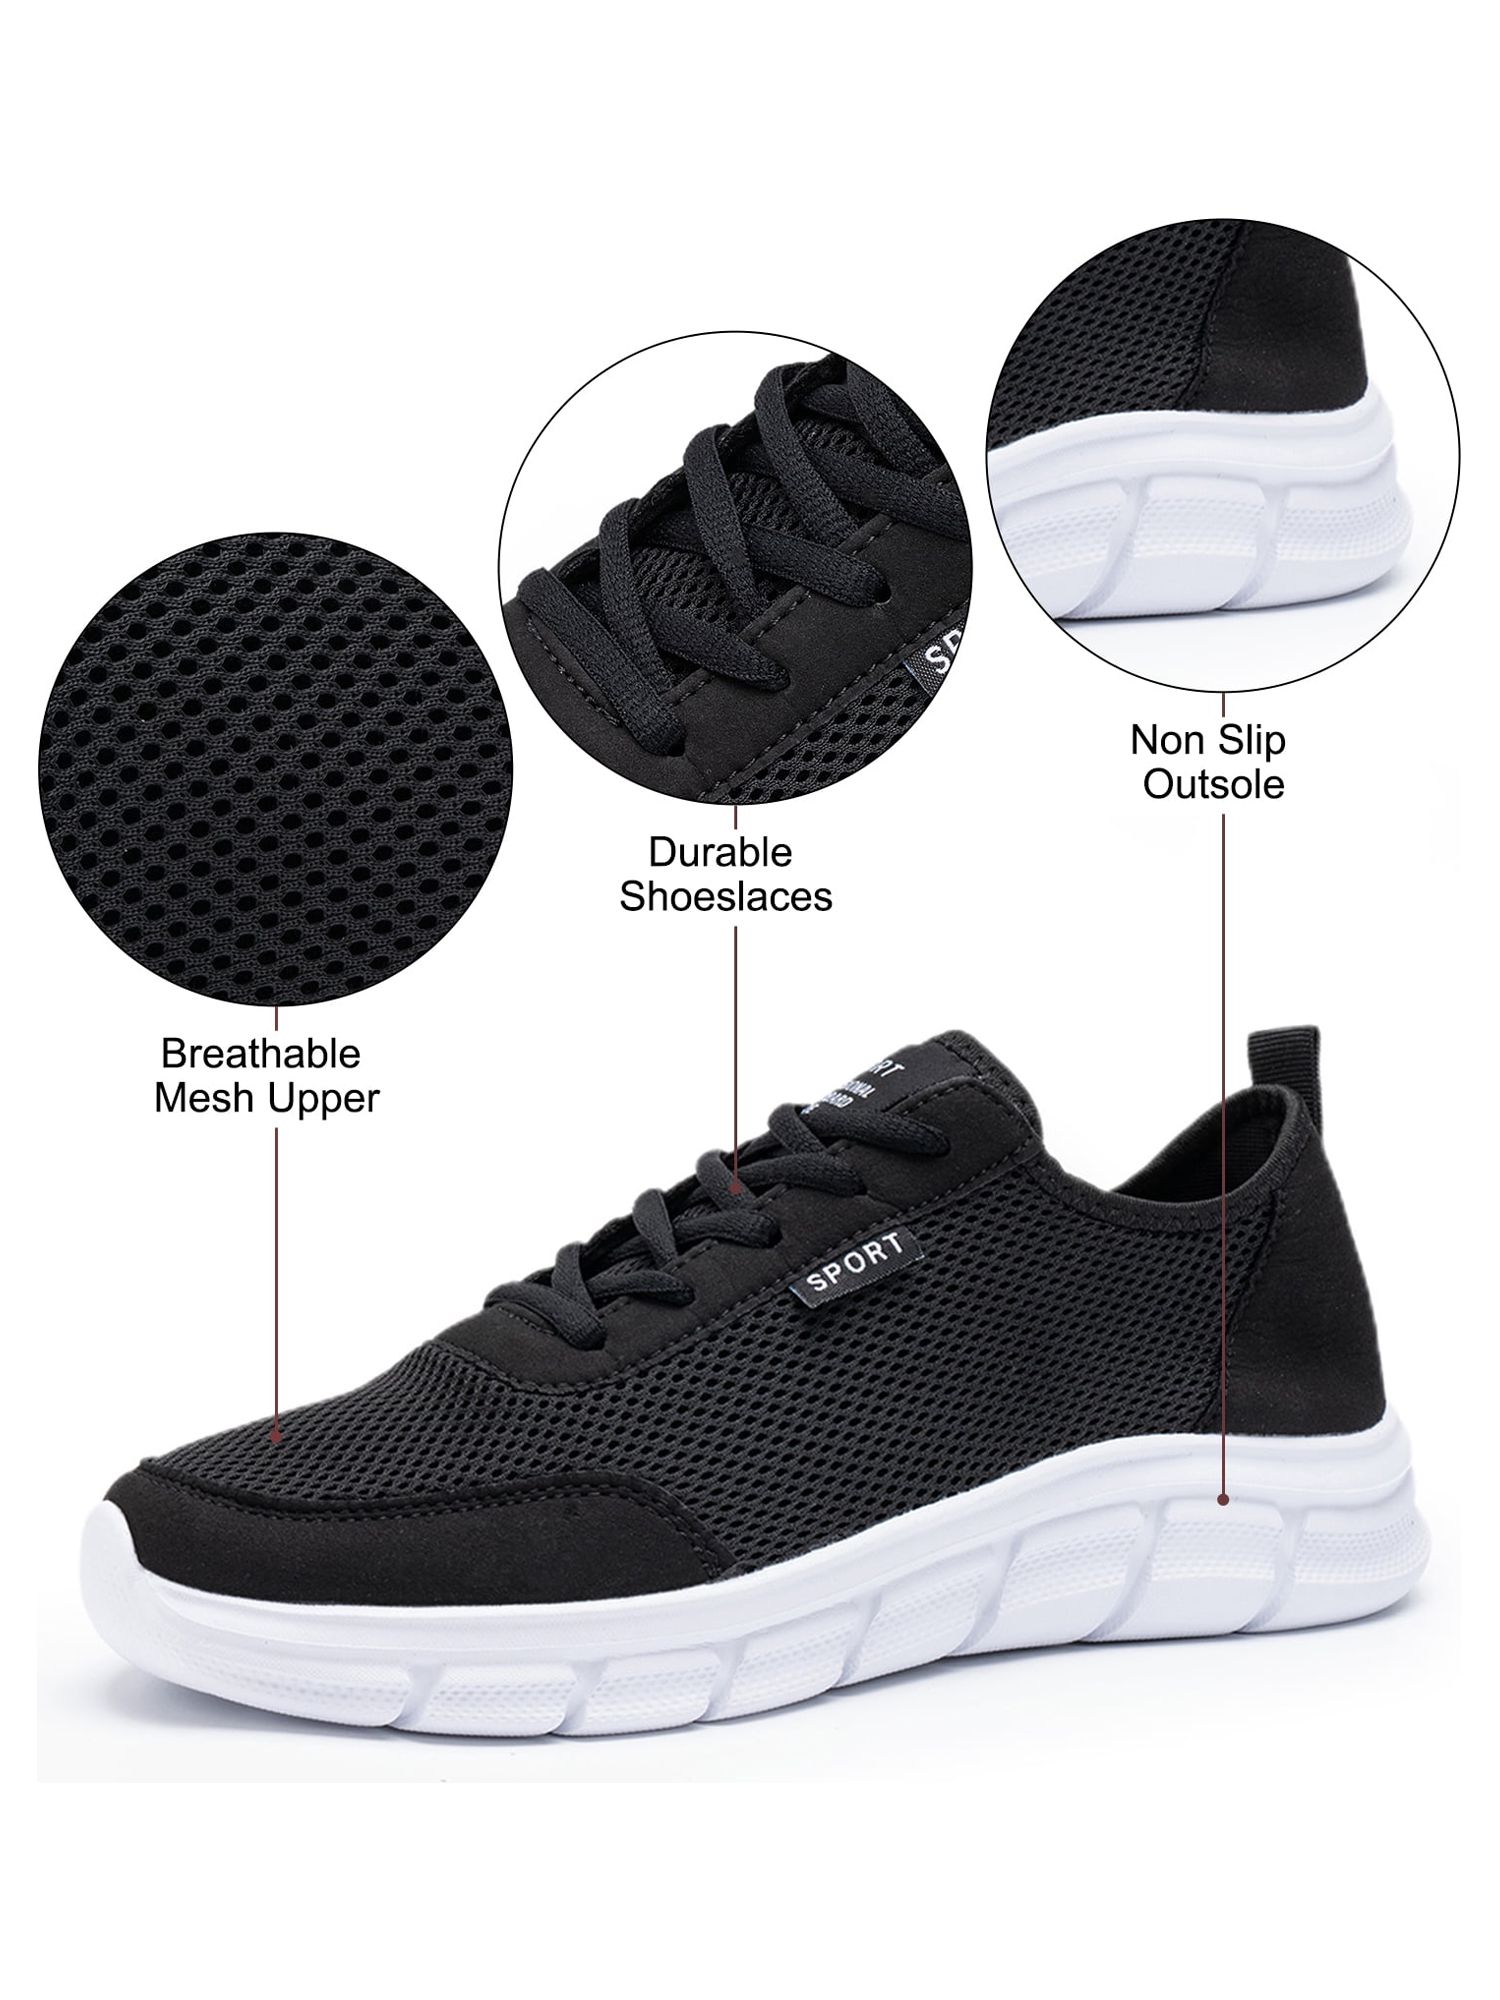 Men's Extra Wide Sneakers Comfor Walking Running Non Slip Lace Up Sport ...